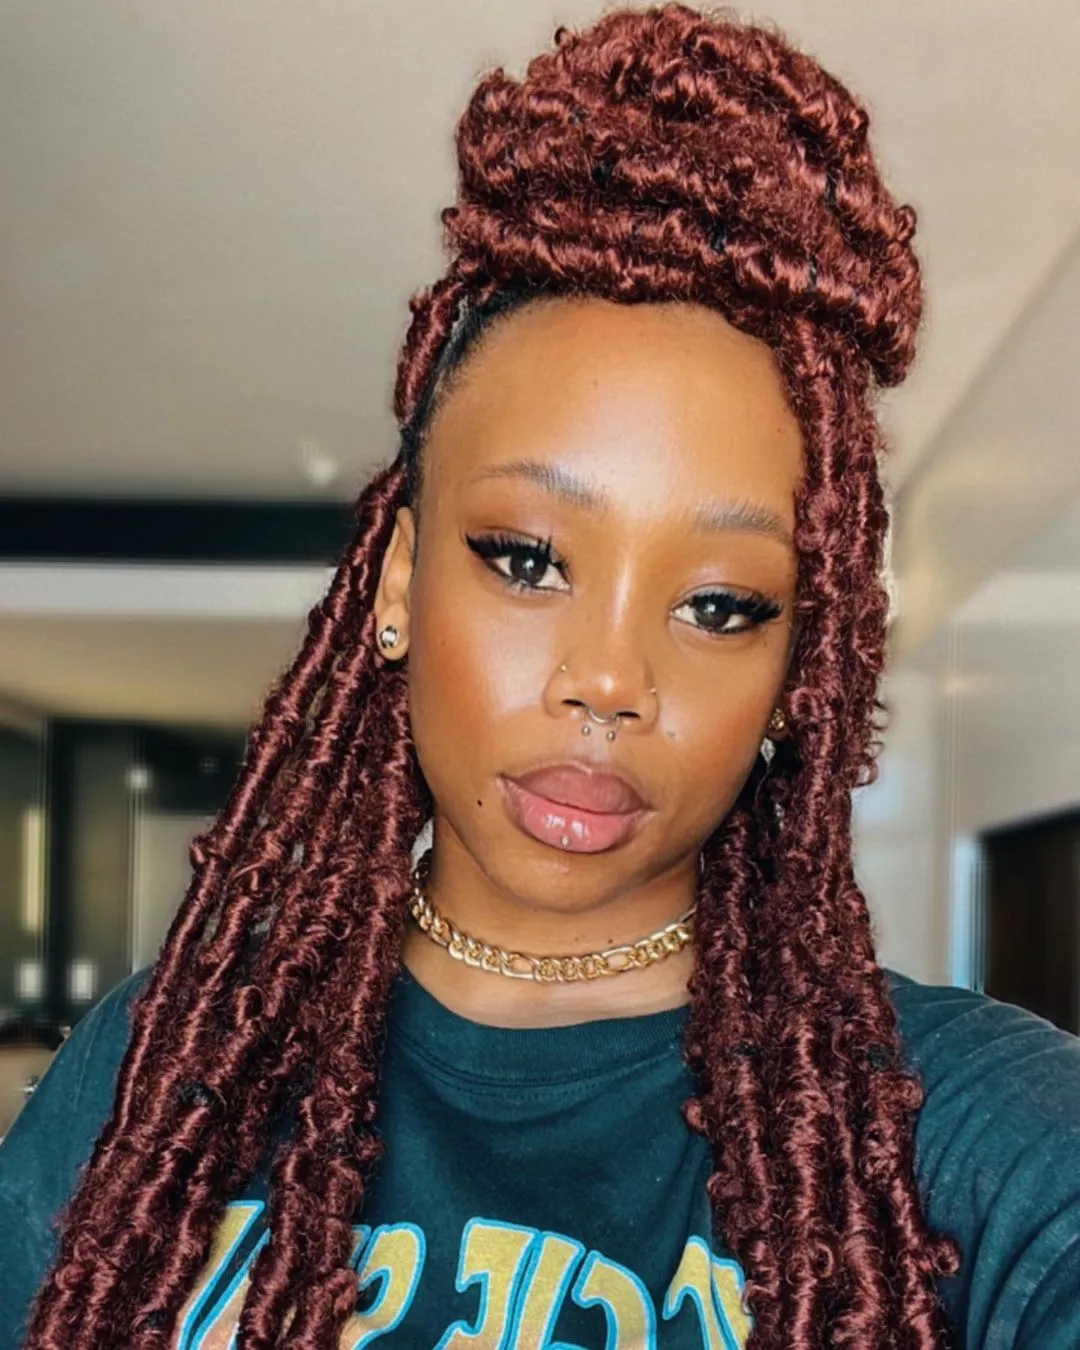 I took my own father away: Bontle Modiselle opens up about her father’s death